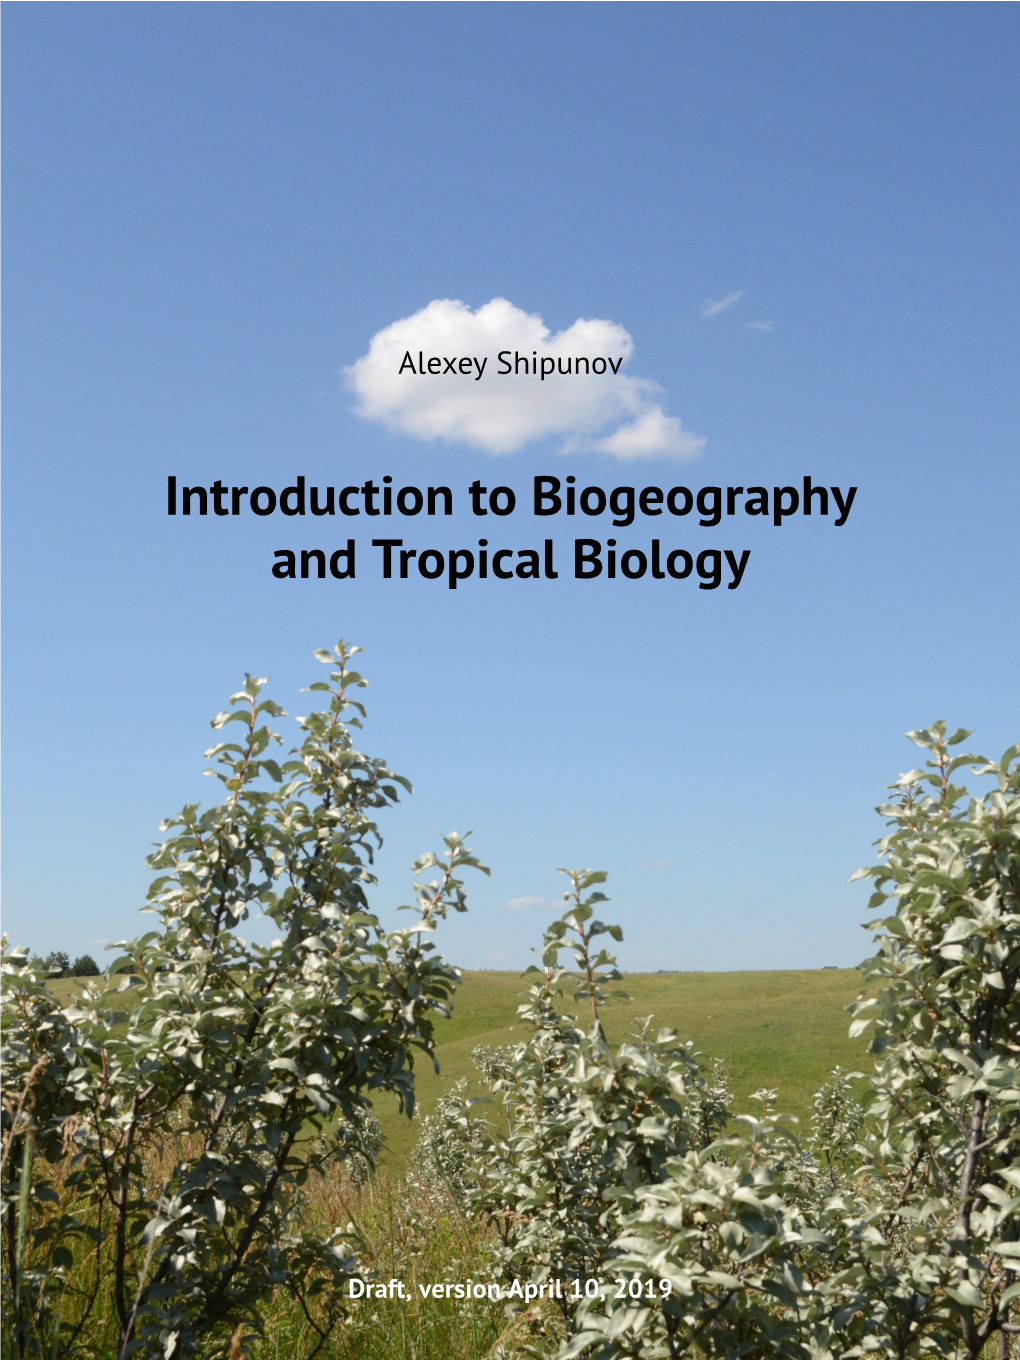 Introduction to Biogeography and Tropical Biology